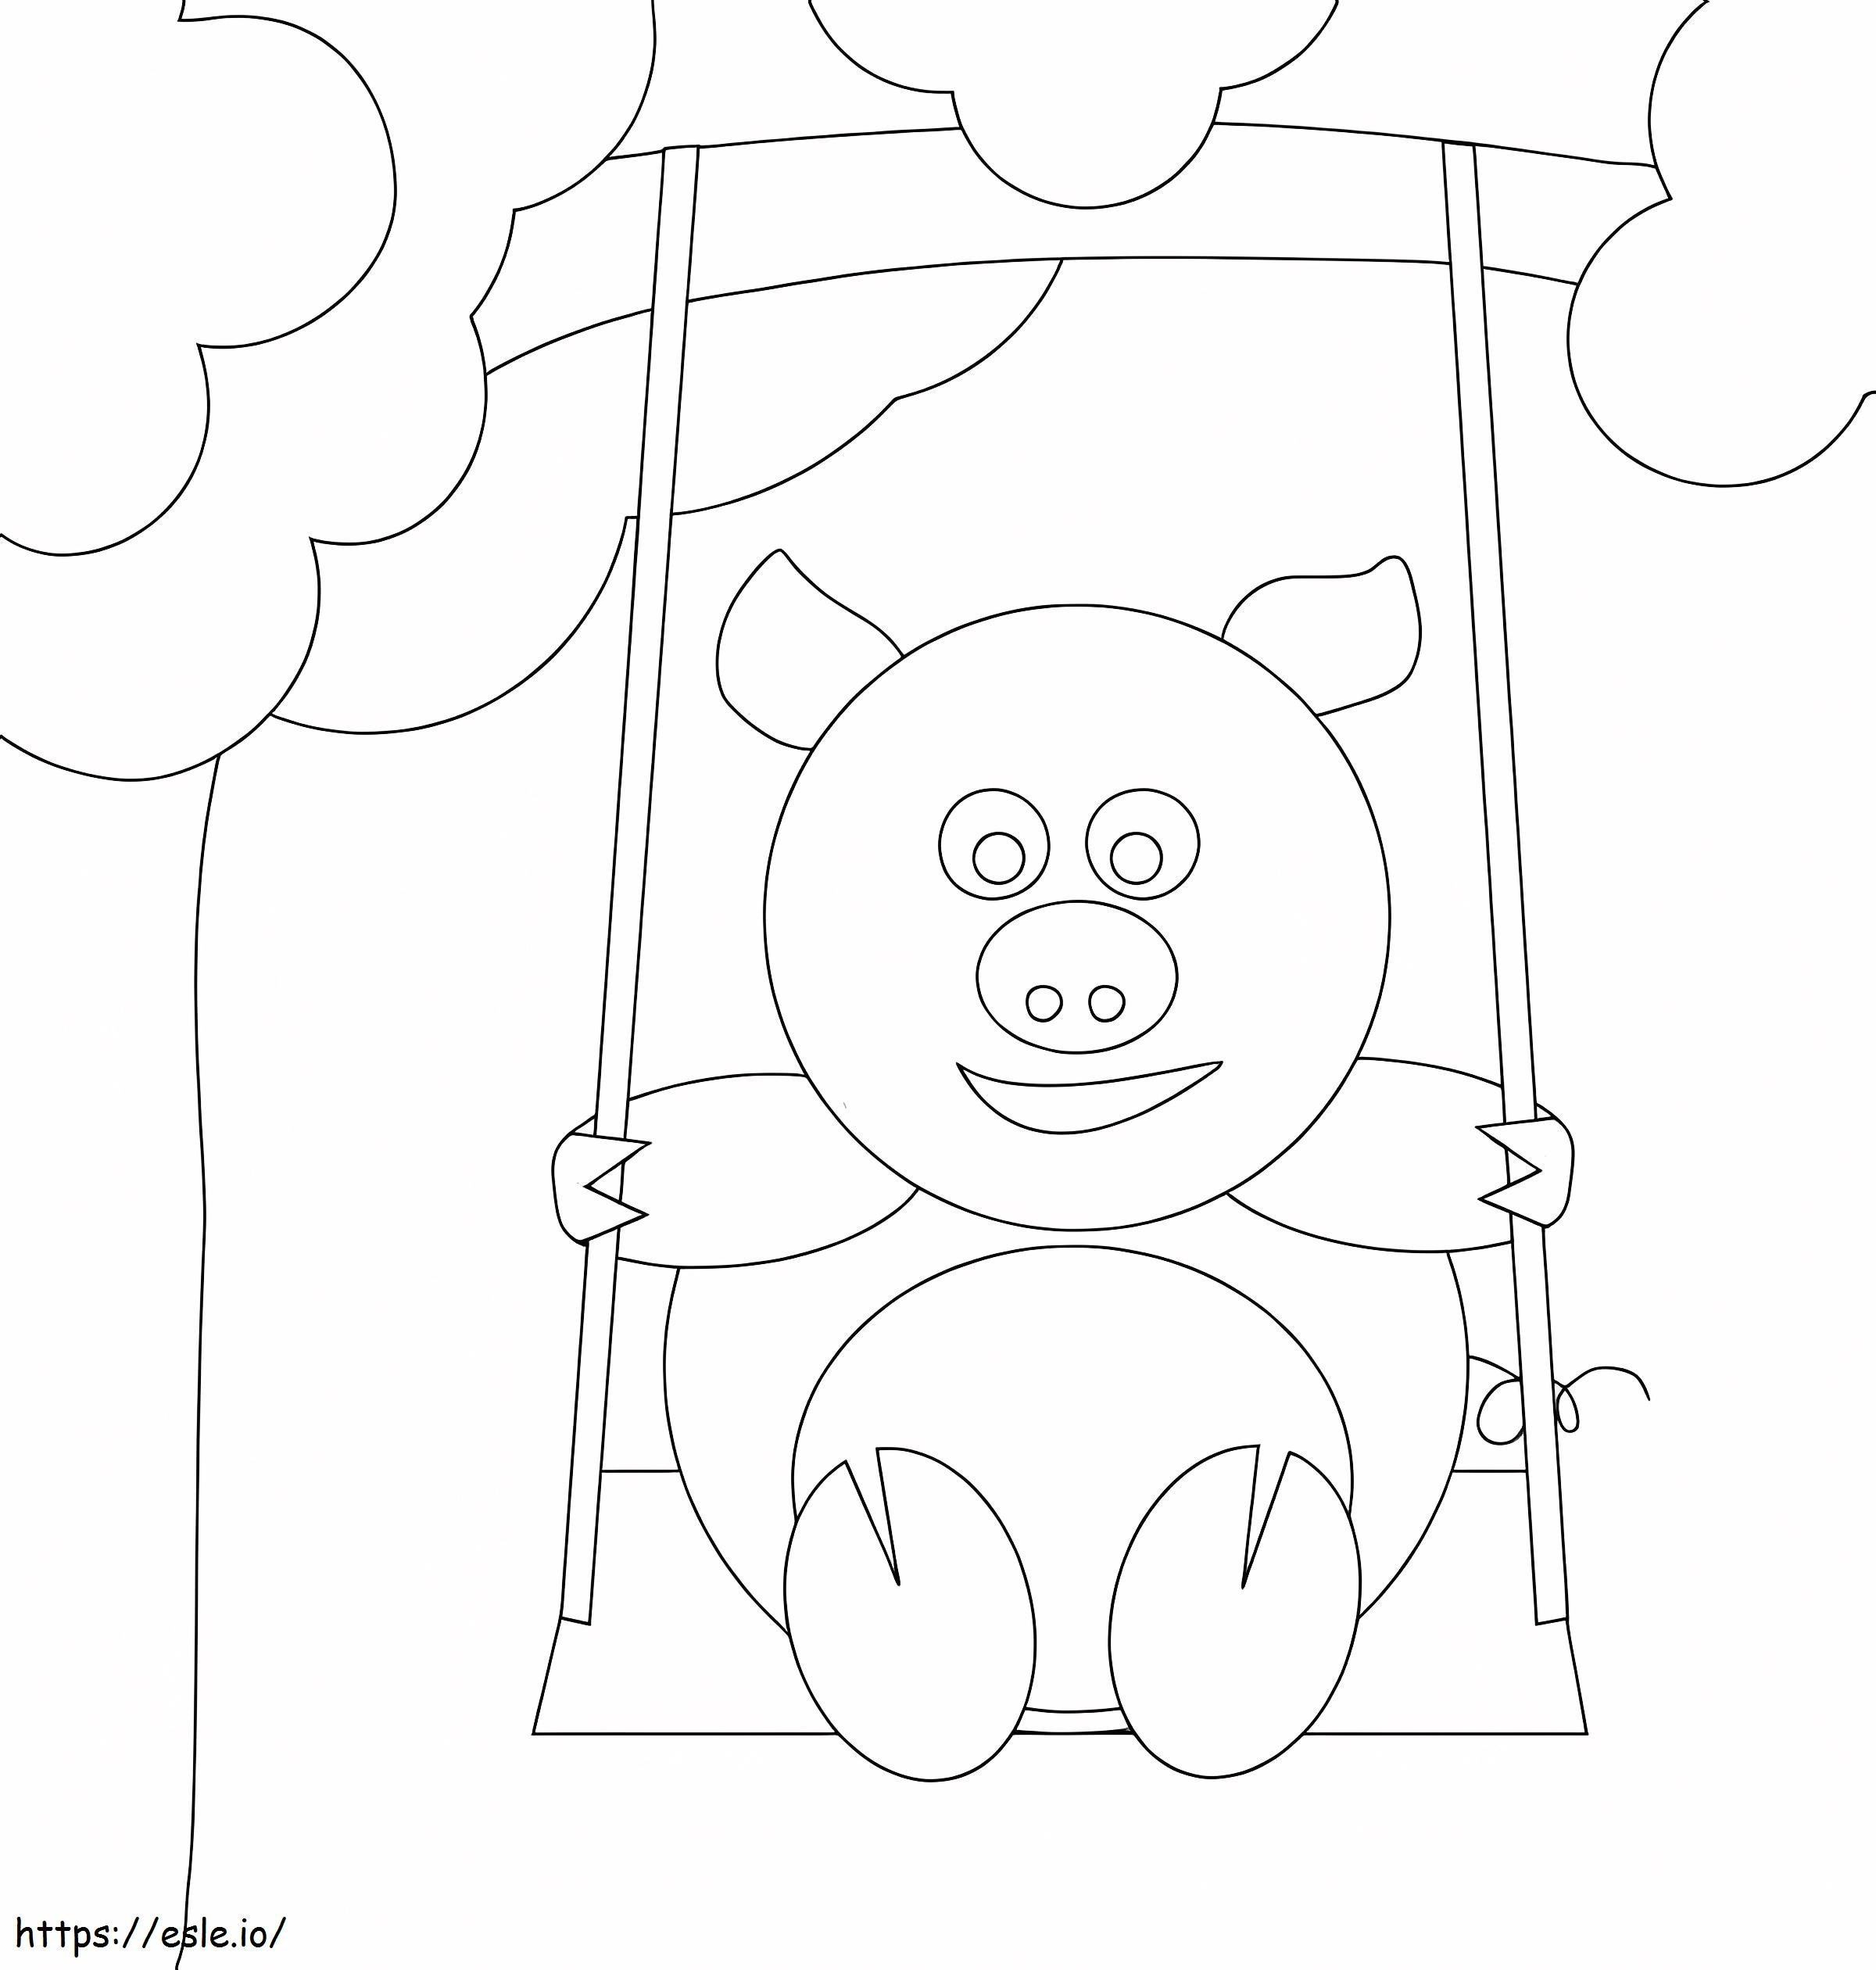 Pig On Swing coloring page